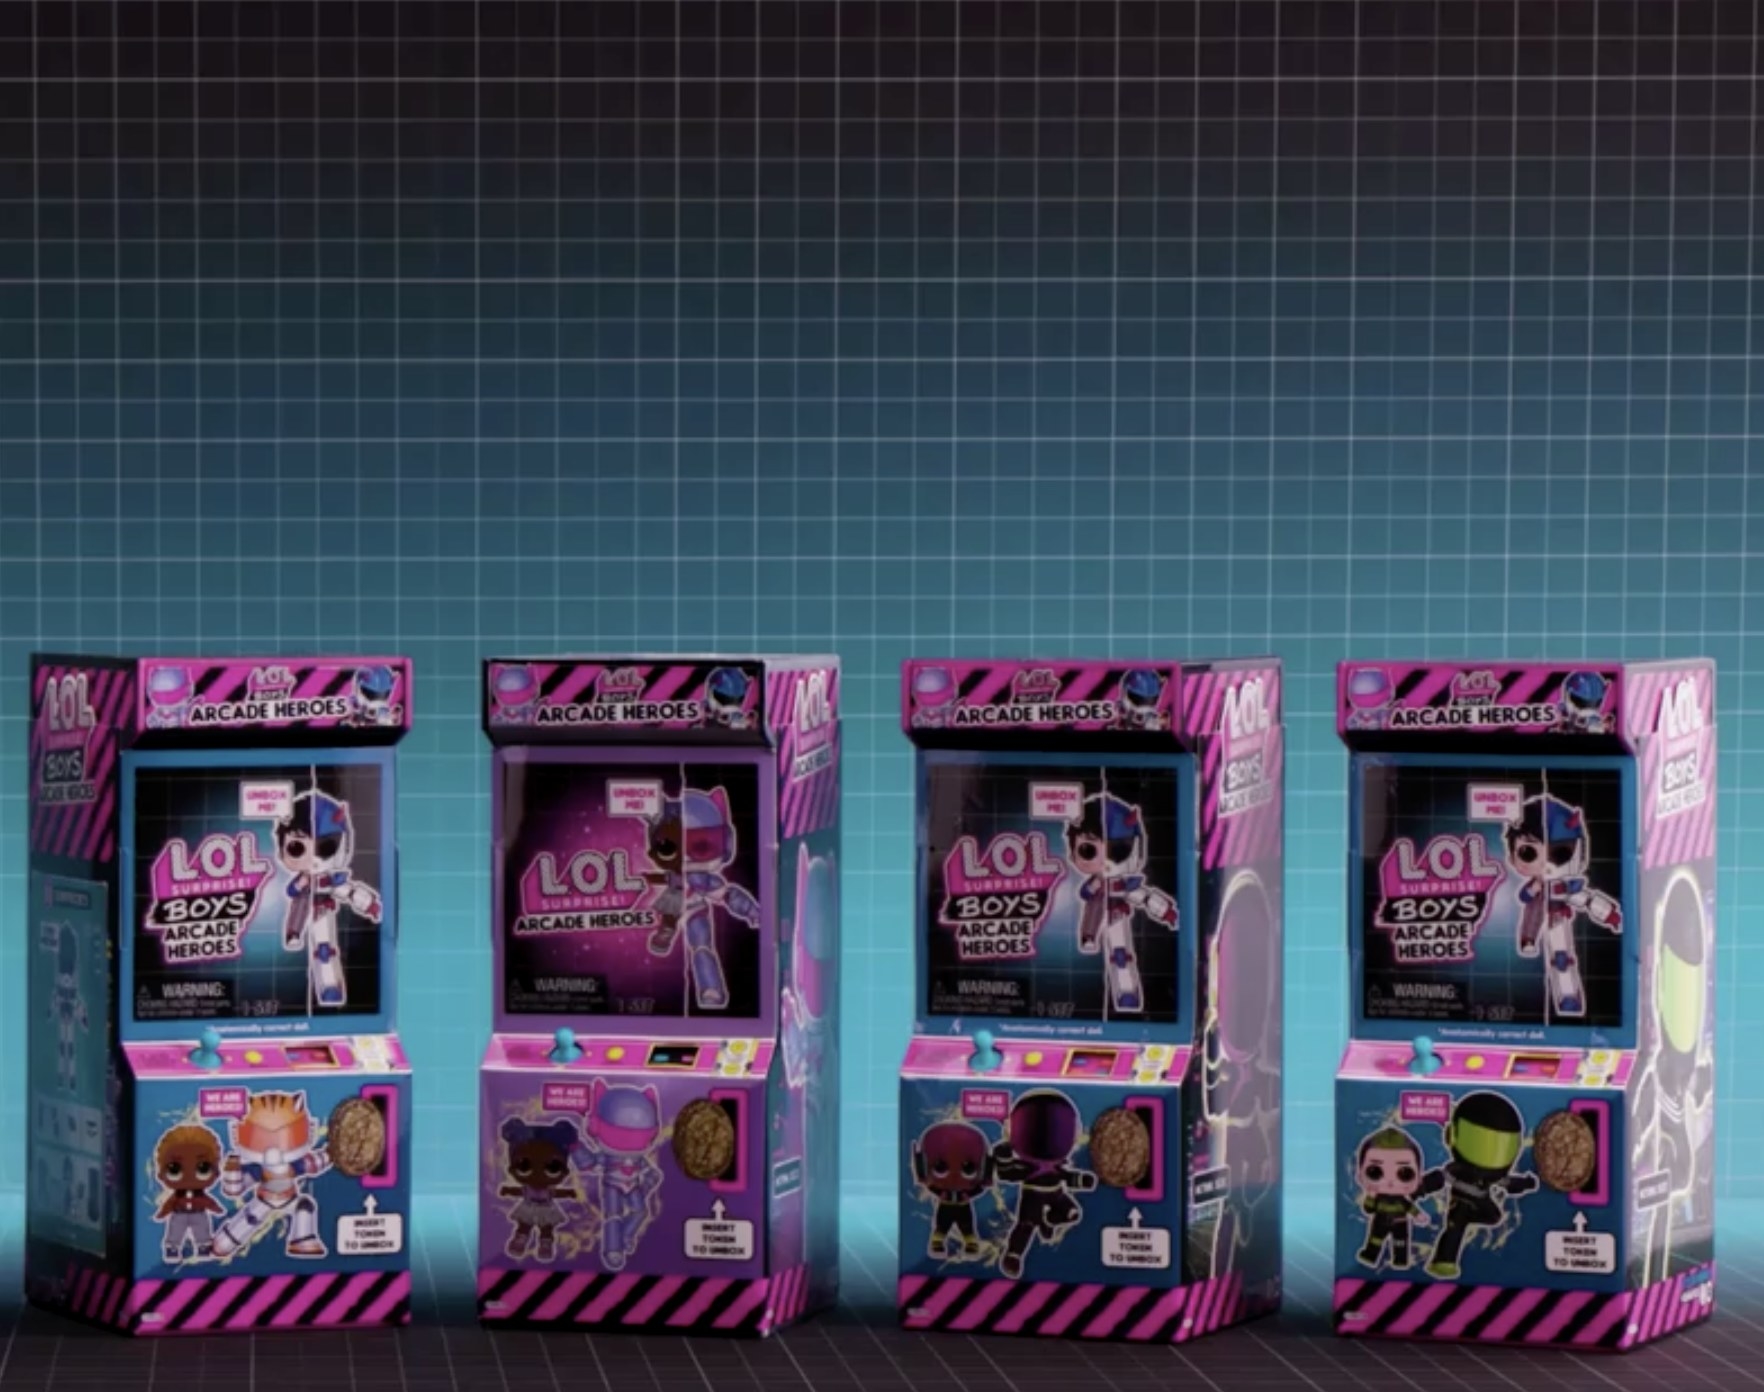 The LOL action figure doll boxes